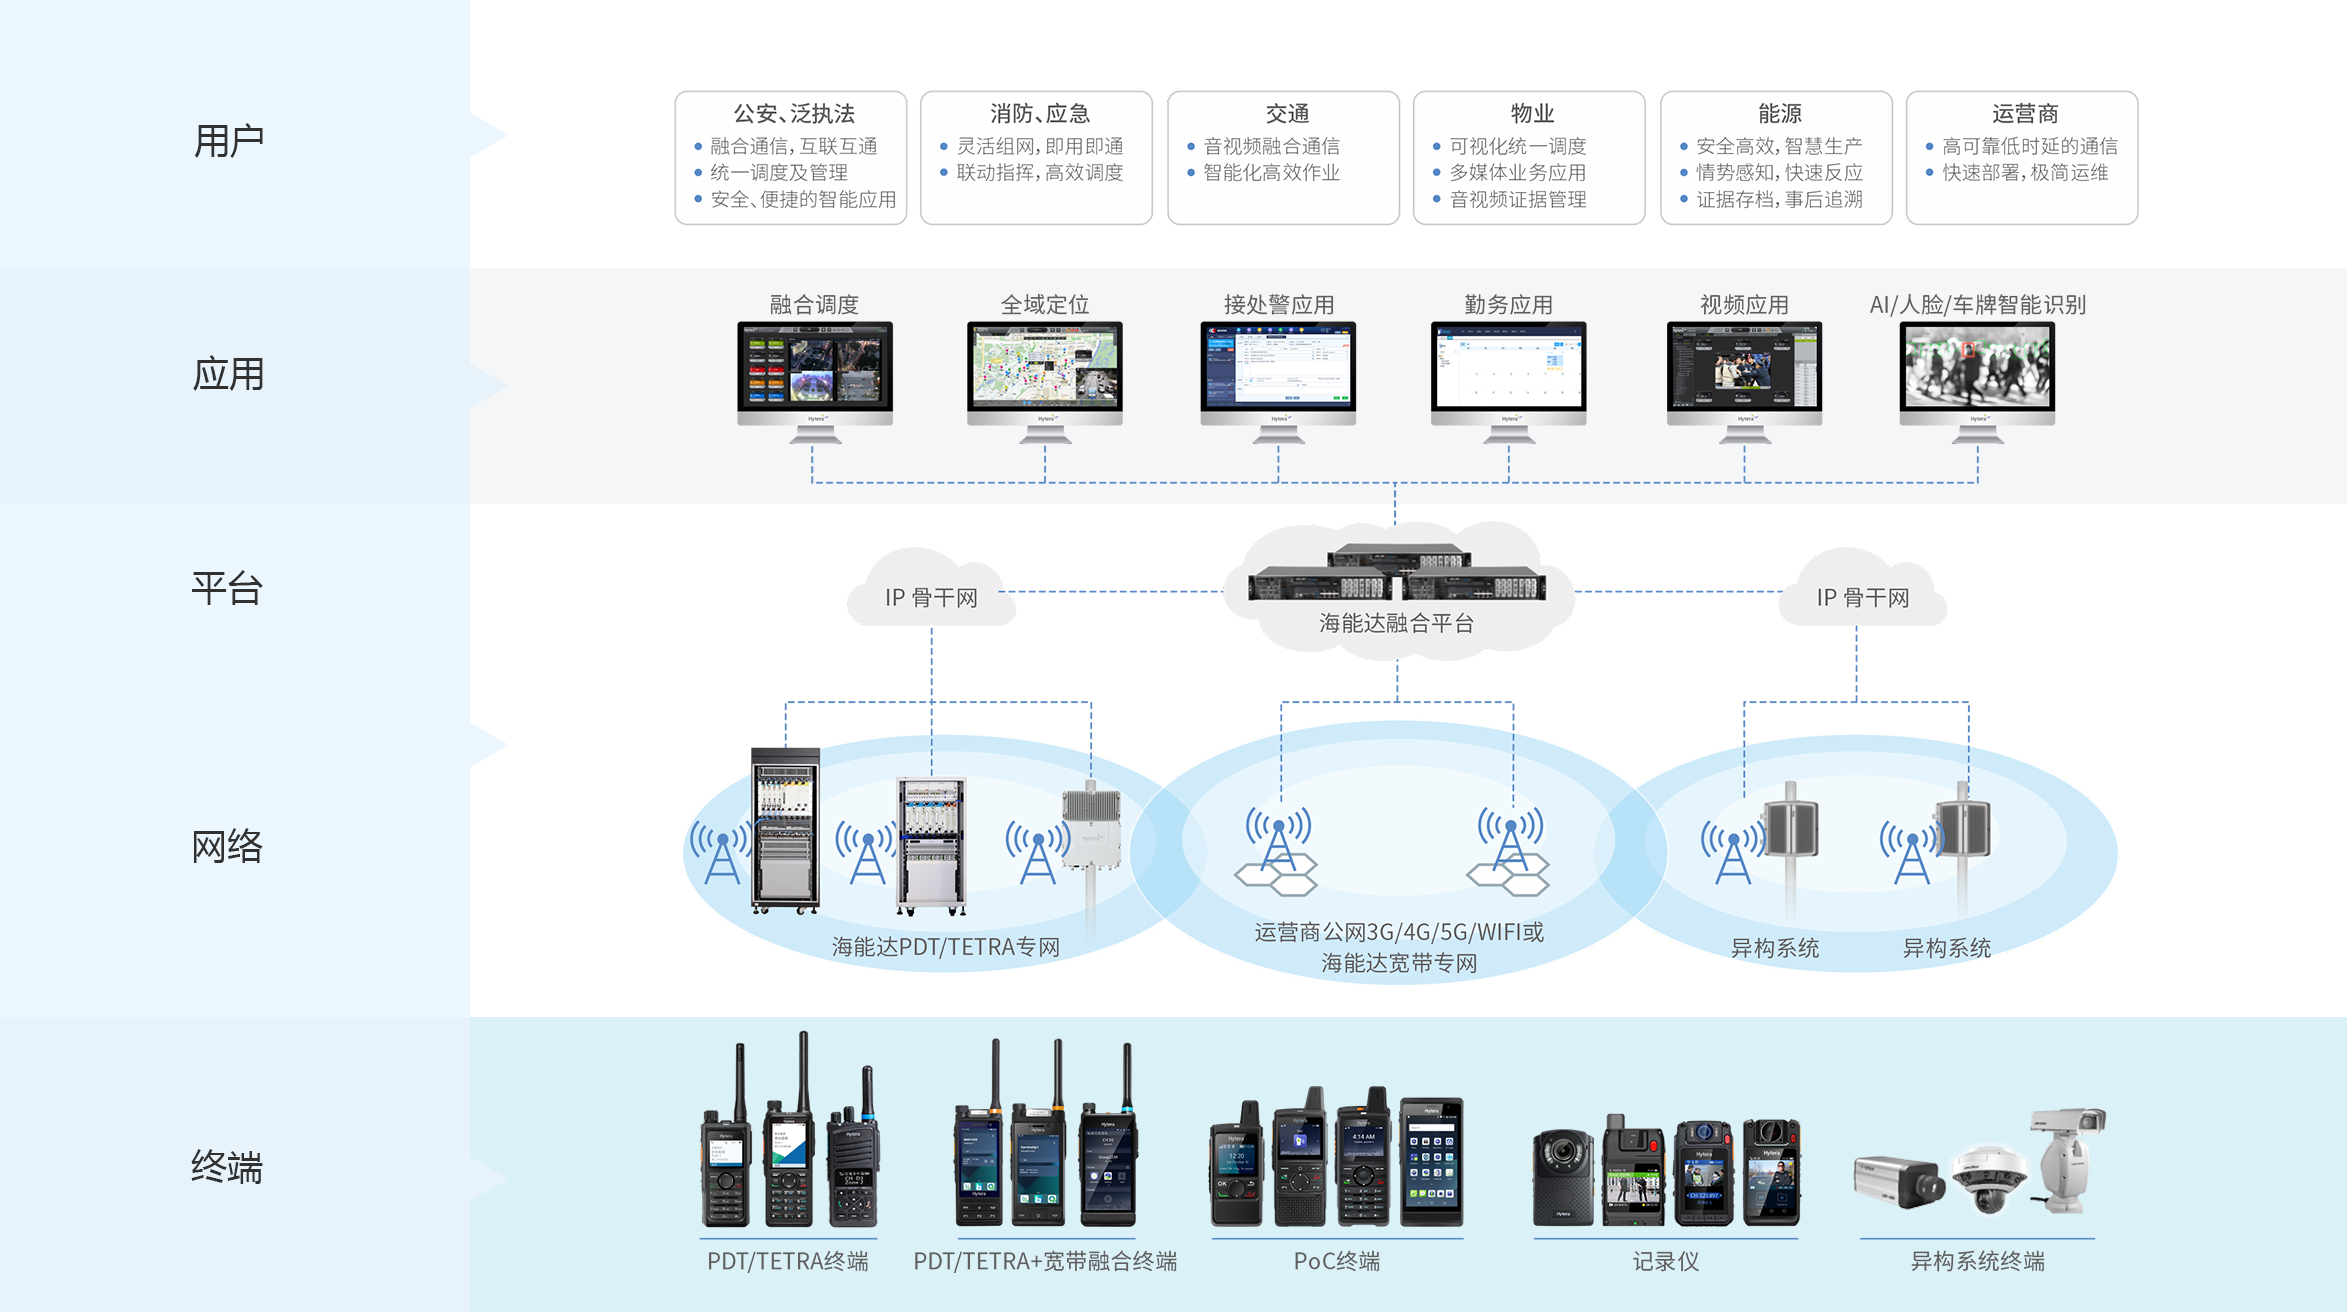 Hytera LTE-PMR Convergence Solution